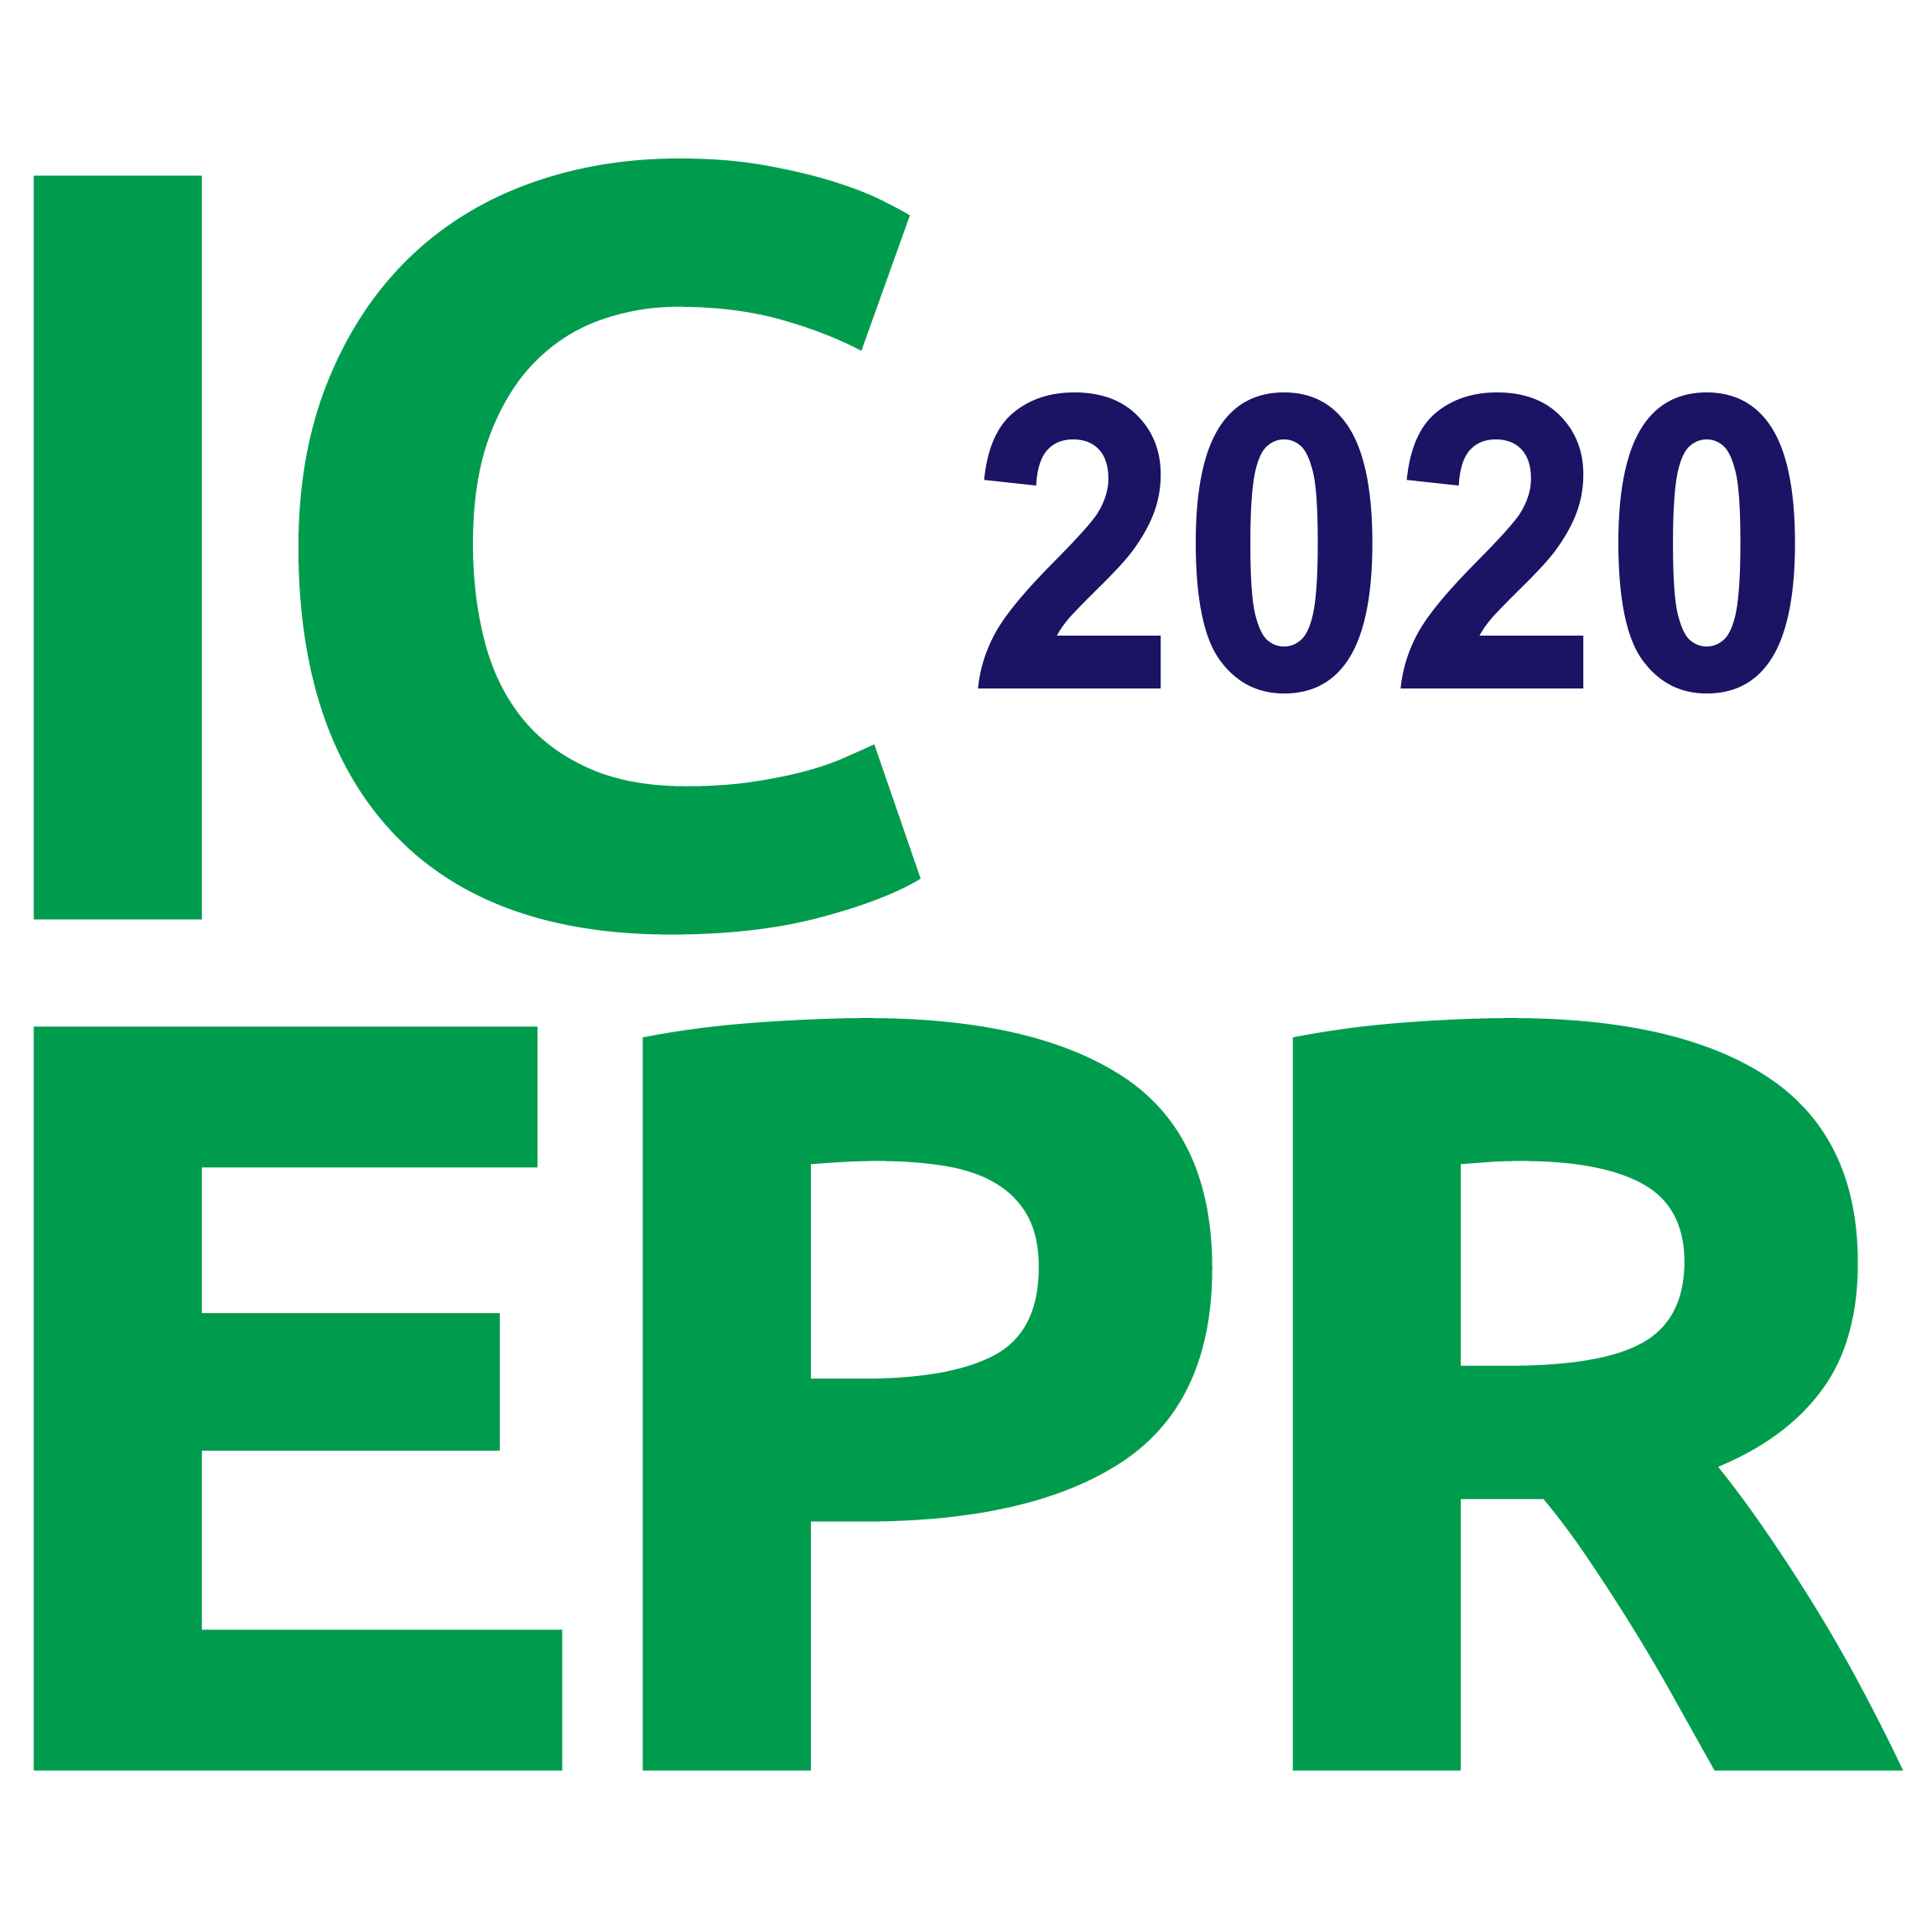 10th International Conference on Environmental Pollution and Remediation (ICEPR’20)